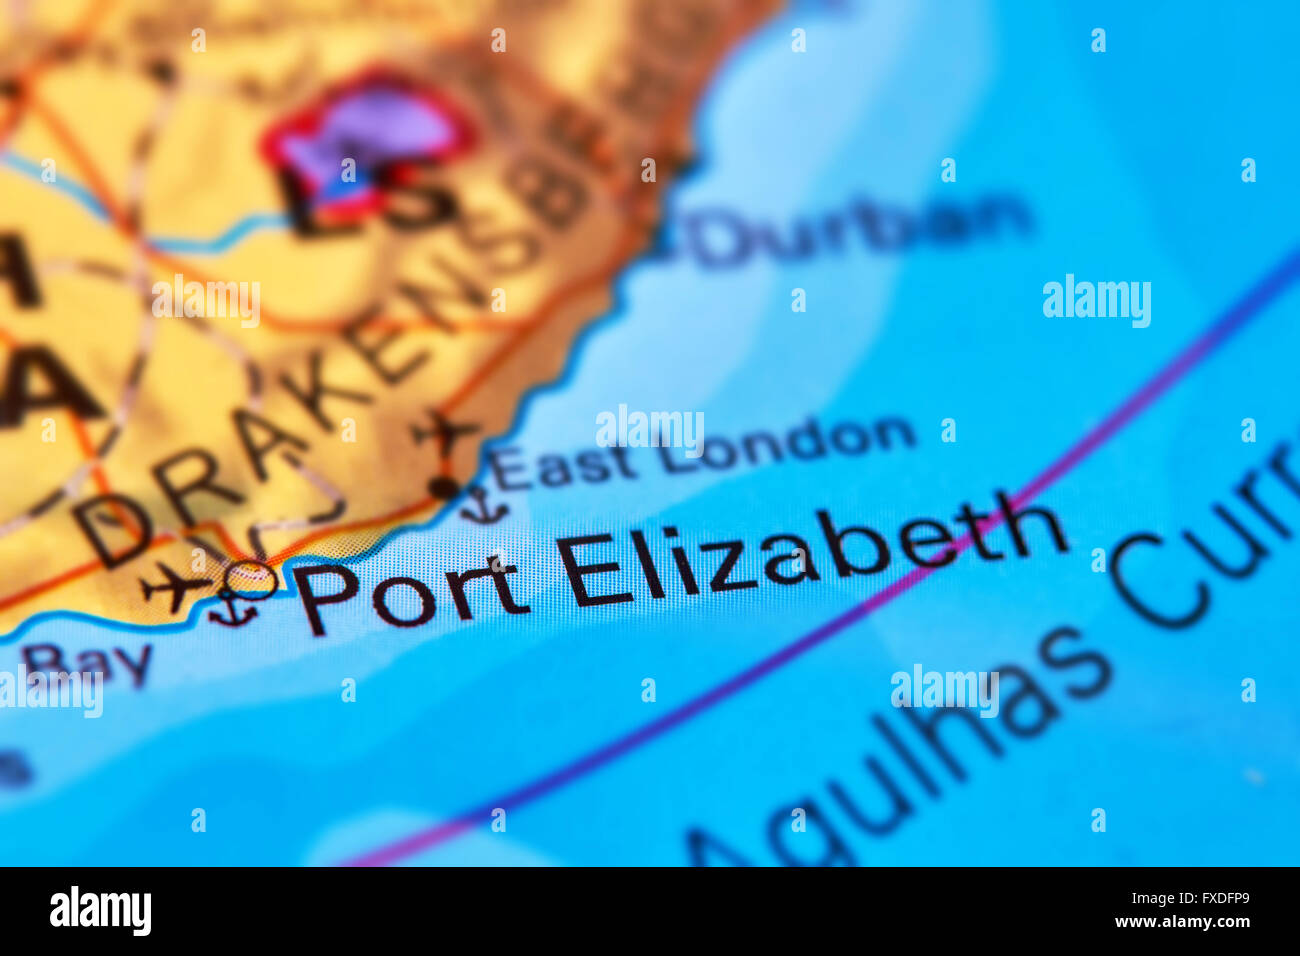 Port Elizabeth City of South Africa on the World Map Stock Photo